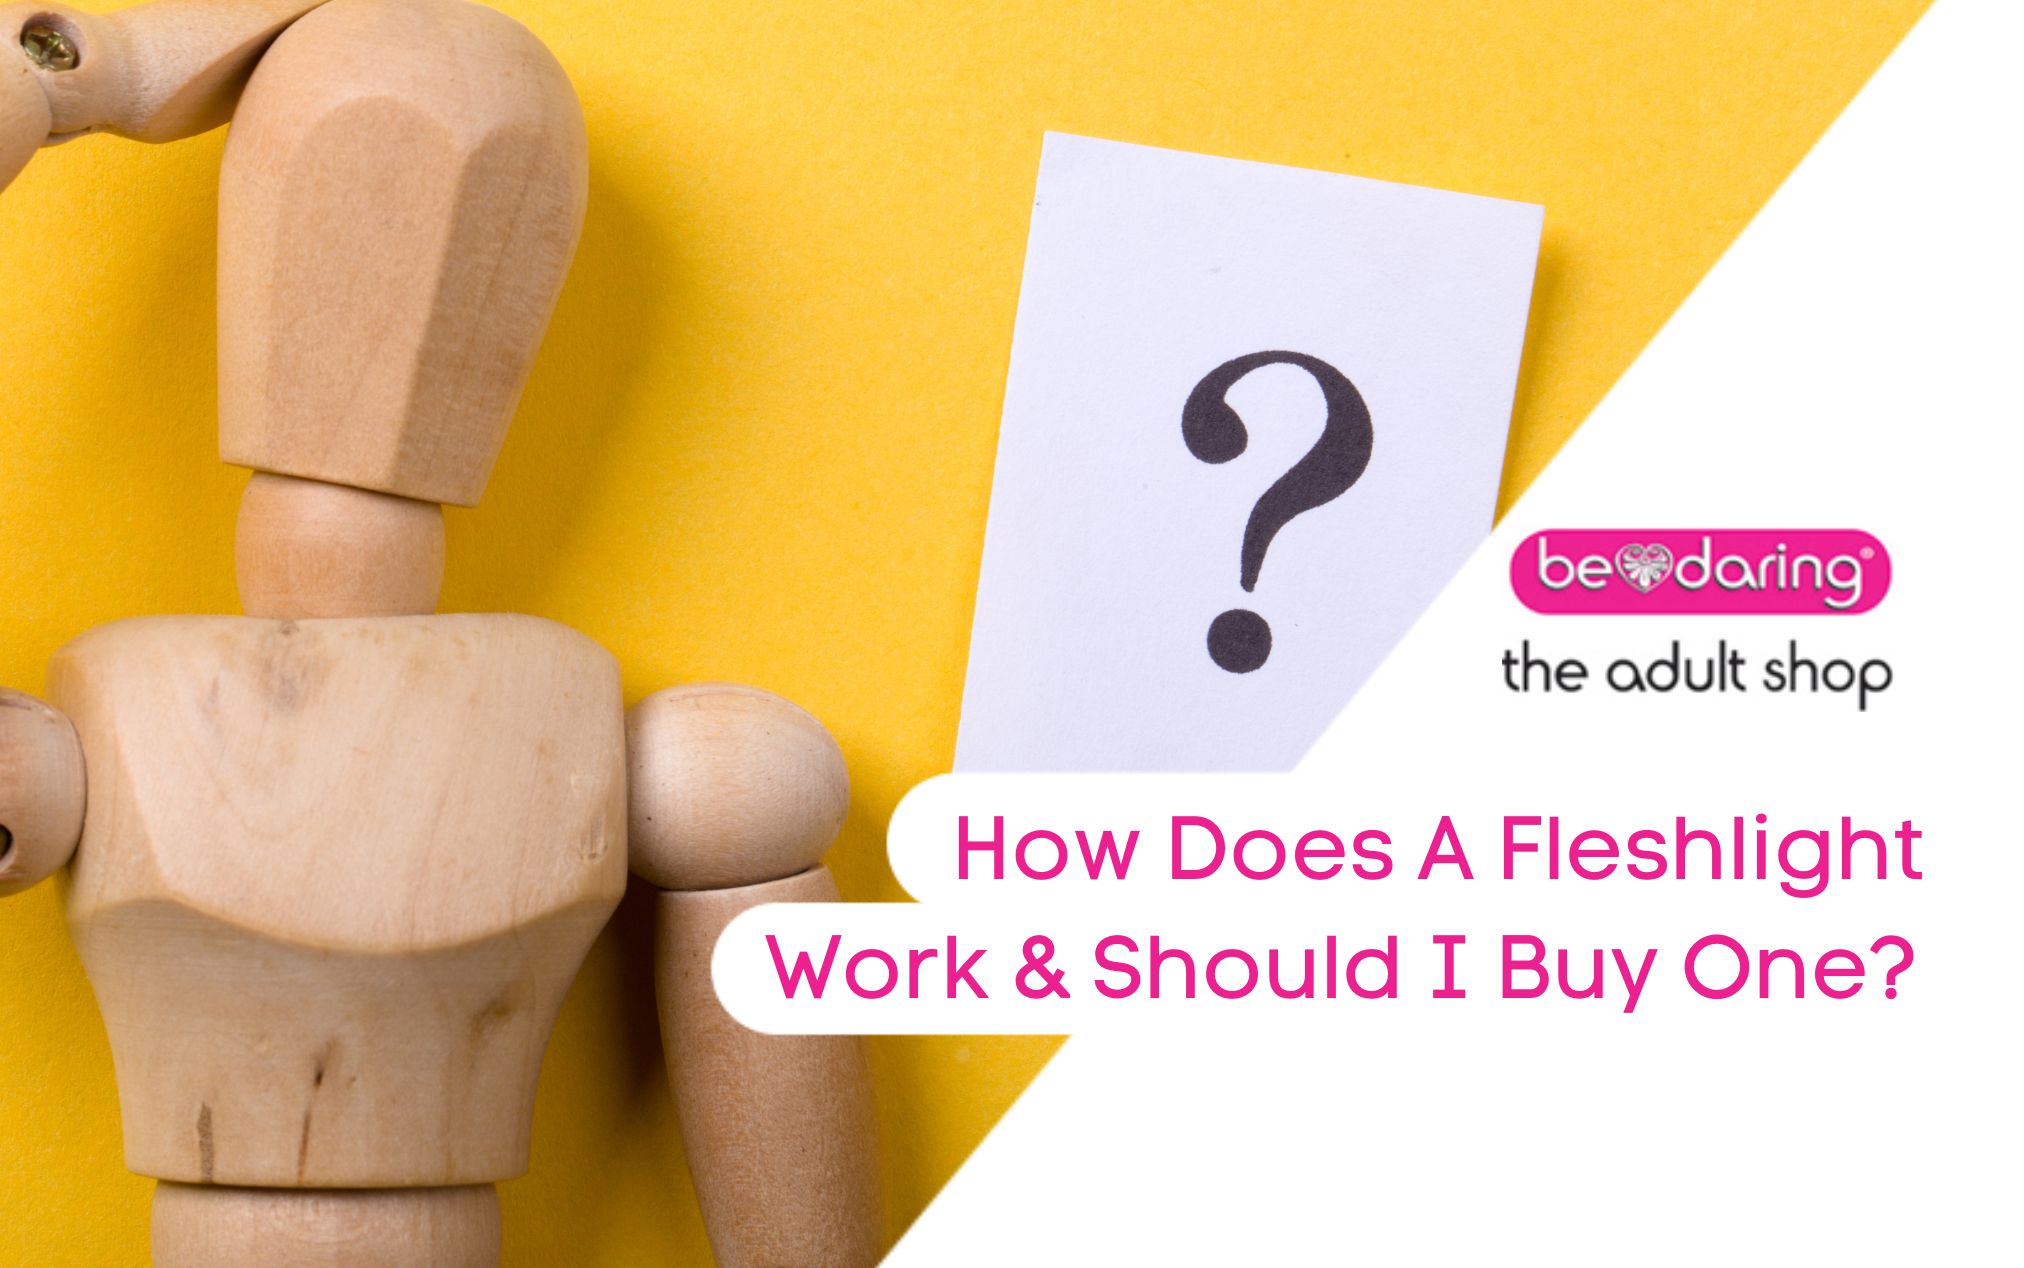 How does a Fleshlight work and should I buy one?